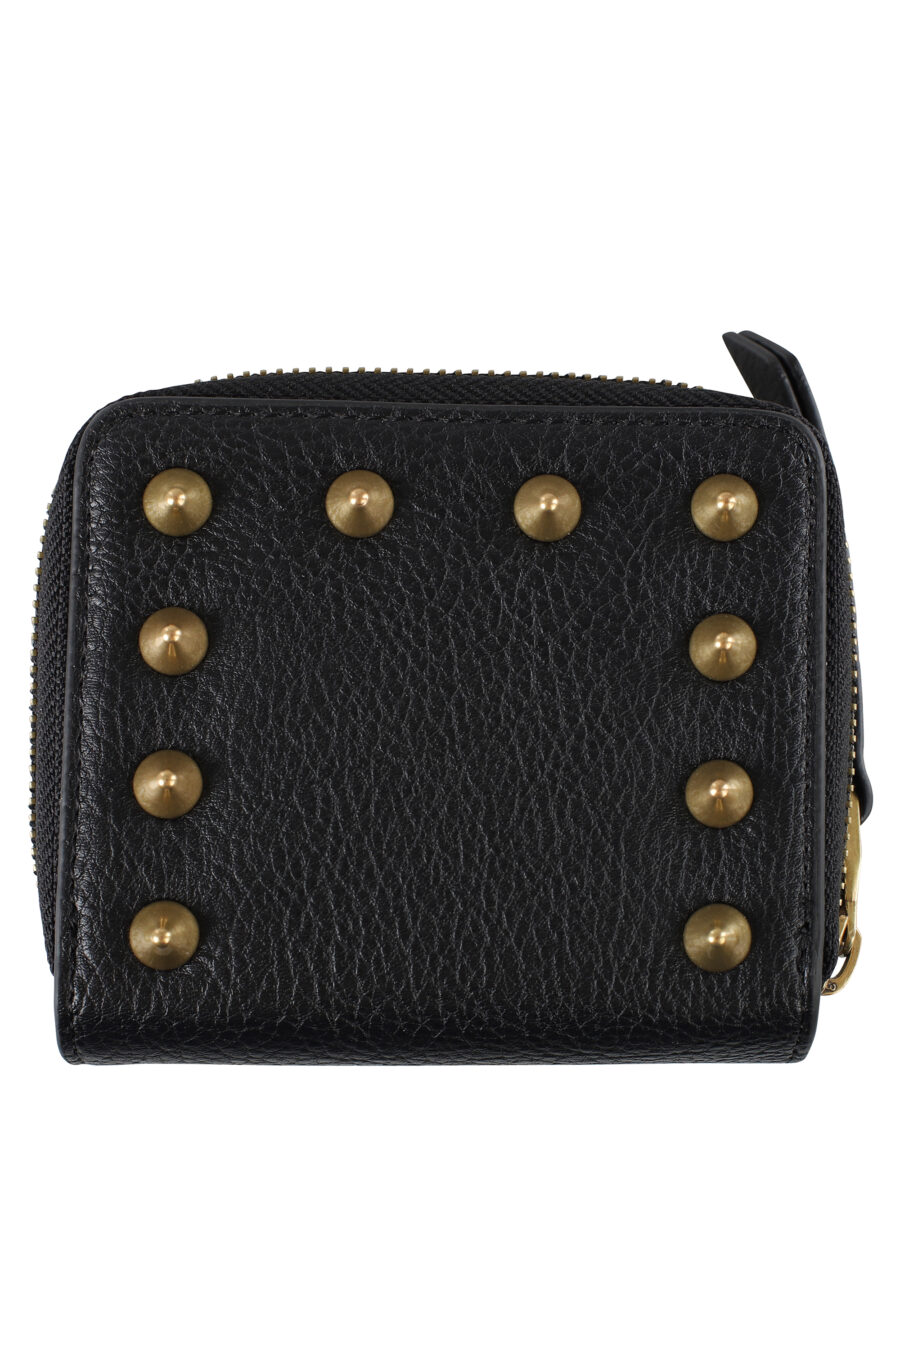 Black wallet with logo plaque and studs - IMG 5306